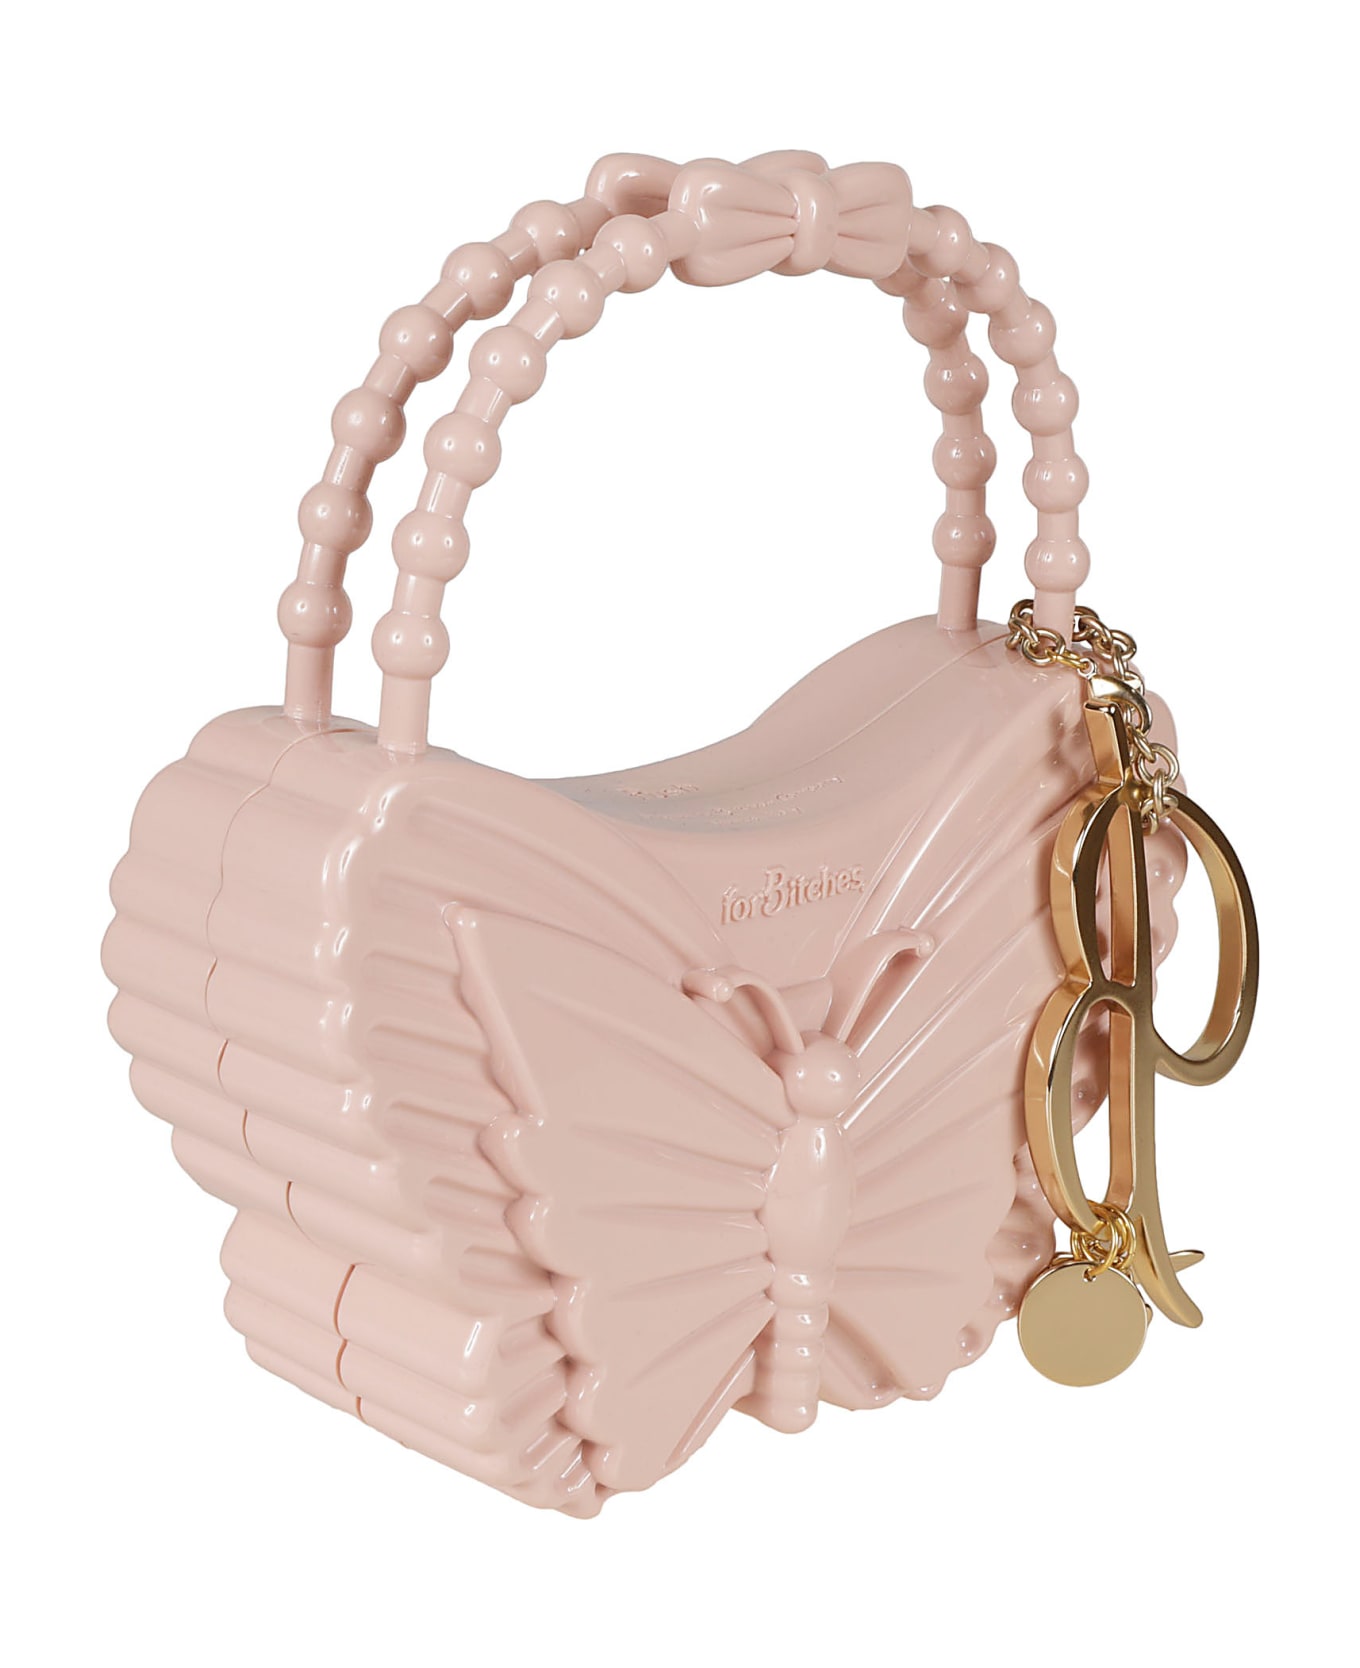 Blumarine Butterfly Embossed Hand Bag - Pale Rose トートバッグ